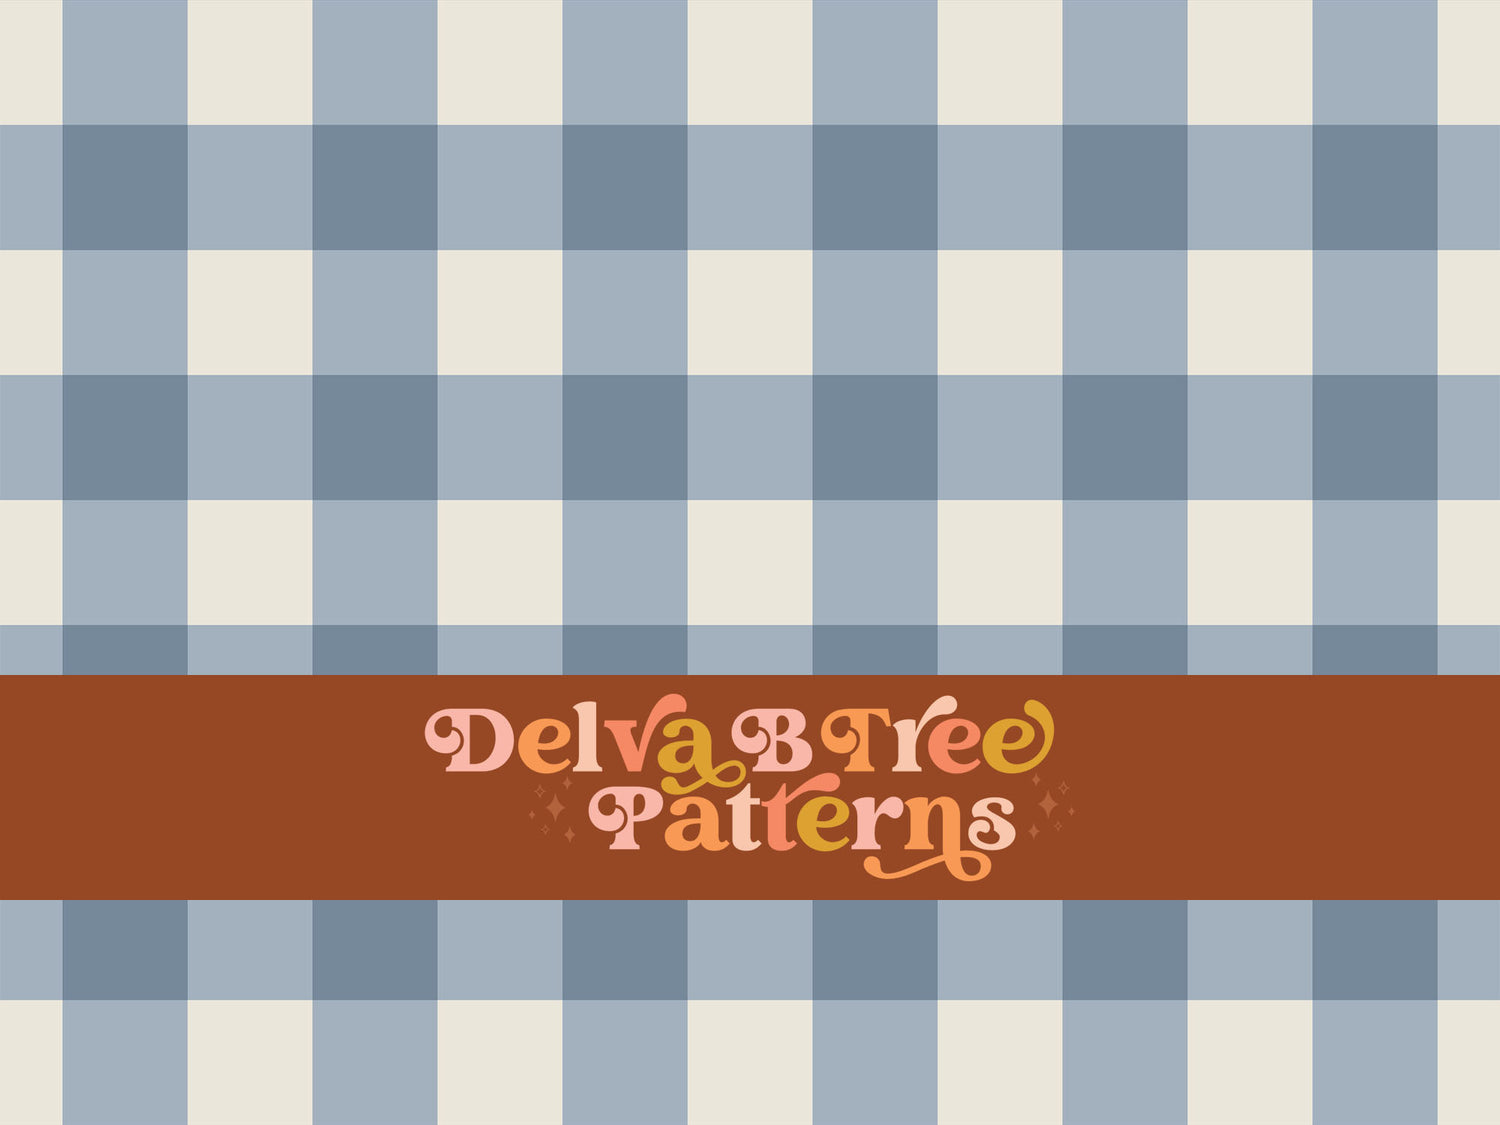 One inch cadet blue and alabaster / vintage off white gingham seamless file for fabric printing perfect for Fourth of July. Boho classic Checked Repeat Pattern for textiles, polymailers, baby boy lovey blankets, nursery crib bedding, kids clothing, girls hair accessories, home decor accents, pet products.